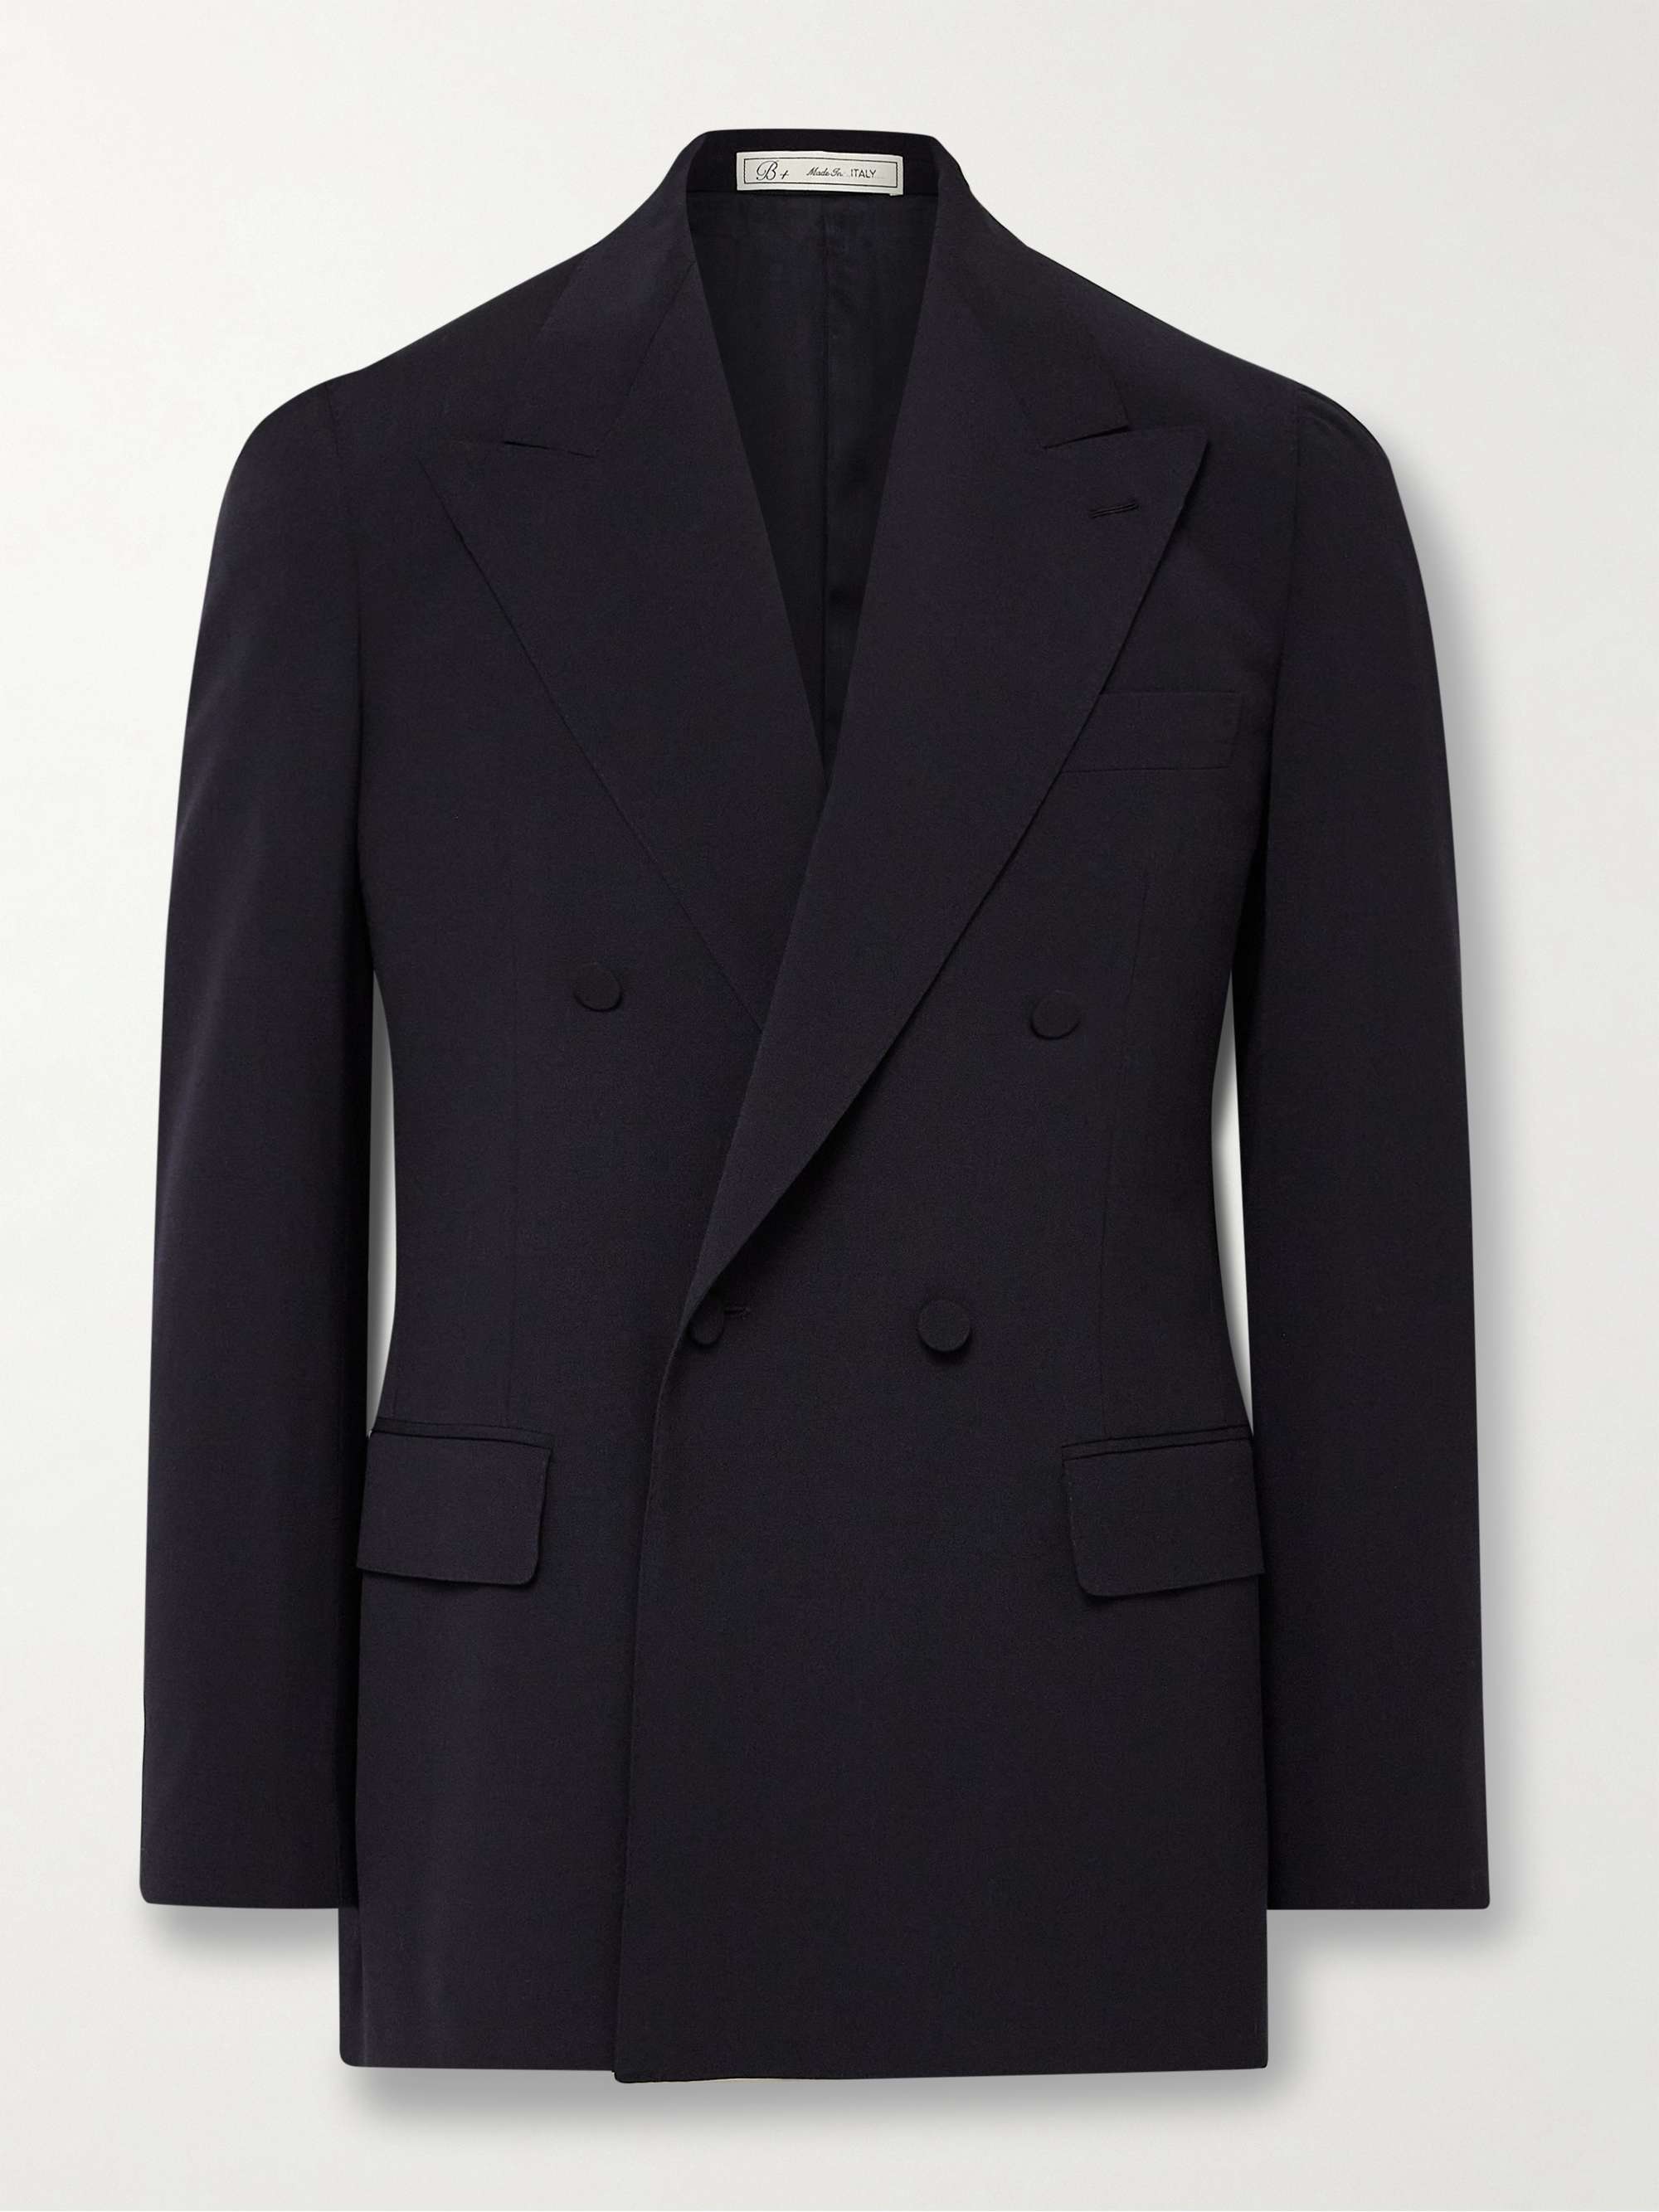 UMIT BENAN B+ Double-Breasted Wool Suit Jacket for Men | MR PORTER